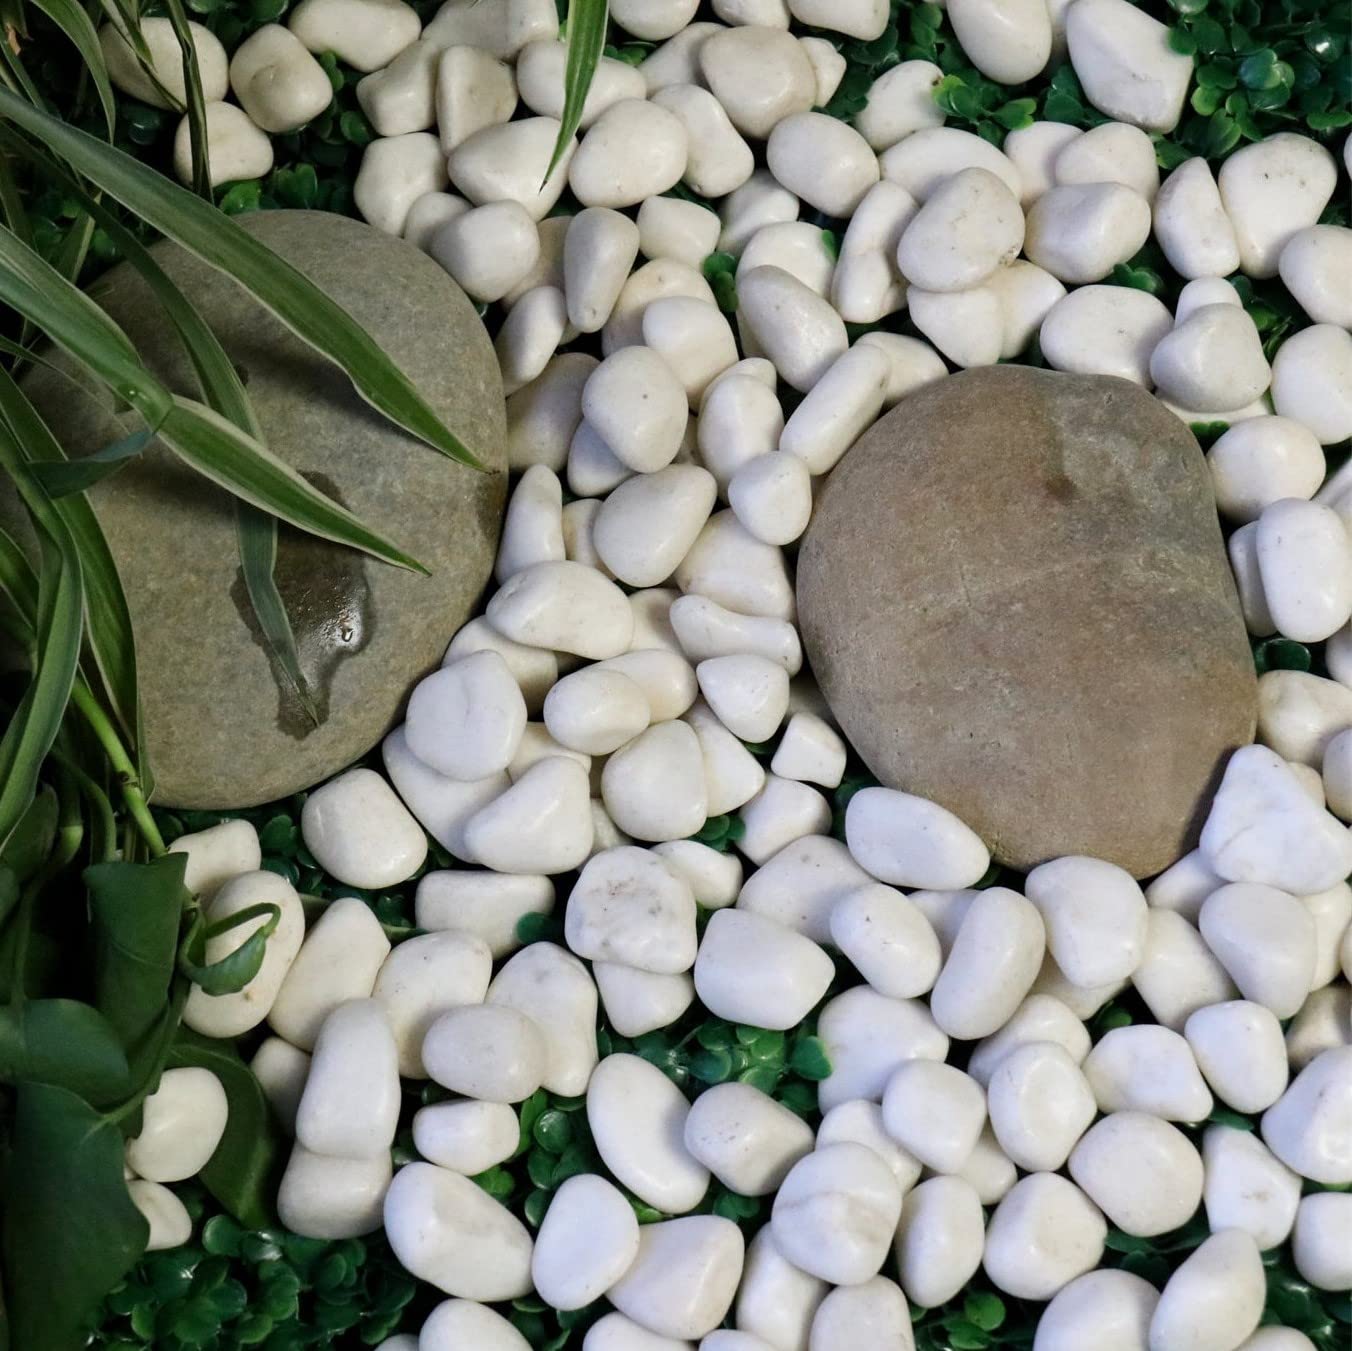 Premium Pebbles White Rocks for Plants. White Decorative Polished Pebbles. 1 to 2 Inch – 10lbs for Plants, Garden, Succulents, pots, Plants (MD (1 to 2 Inch), White - Lightly Polished, 10)